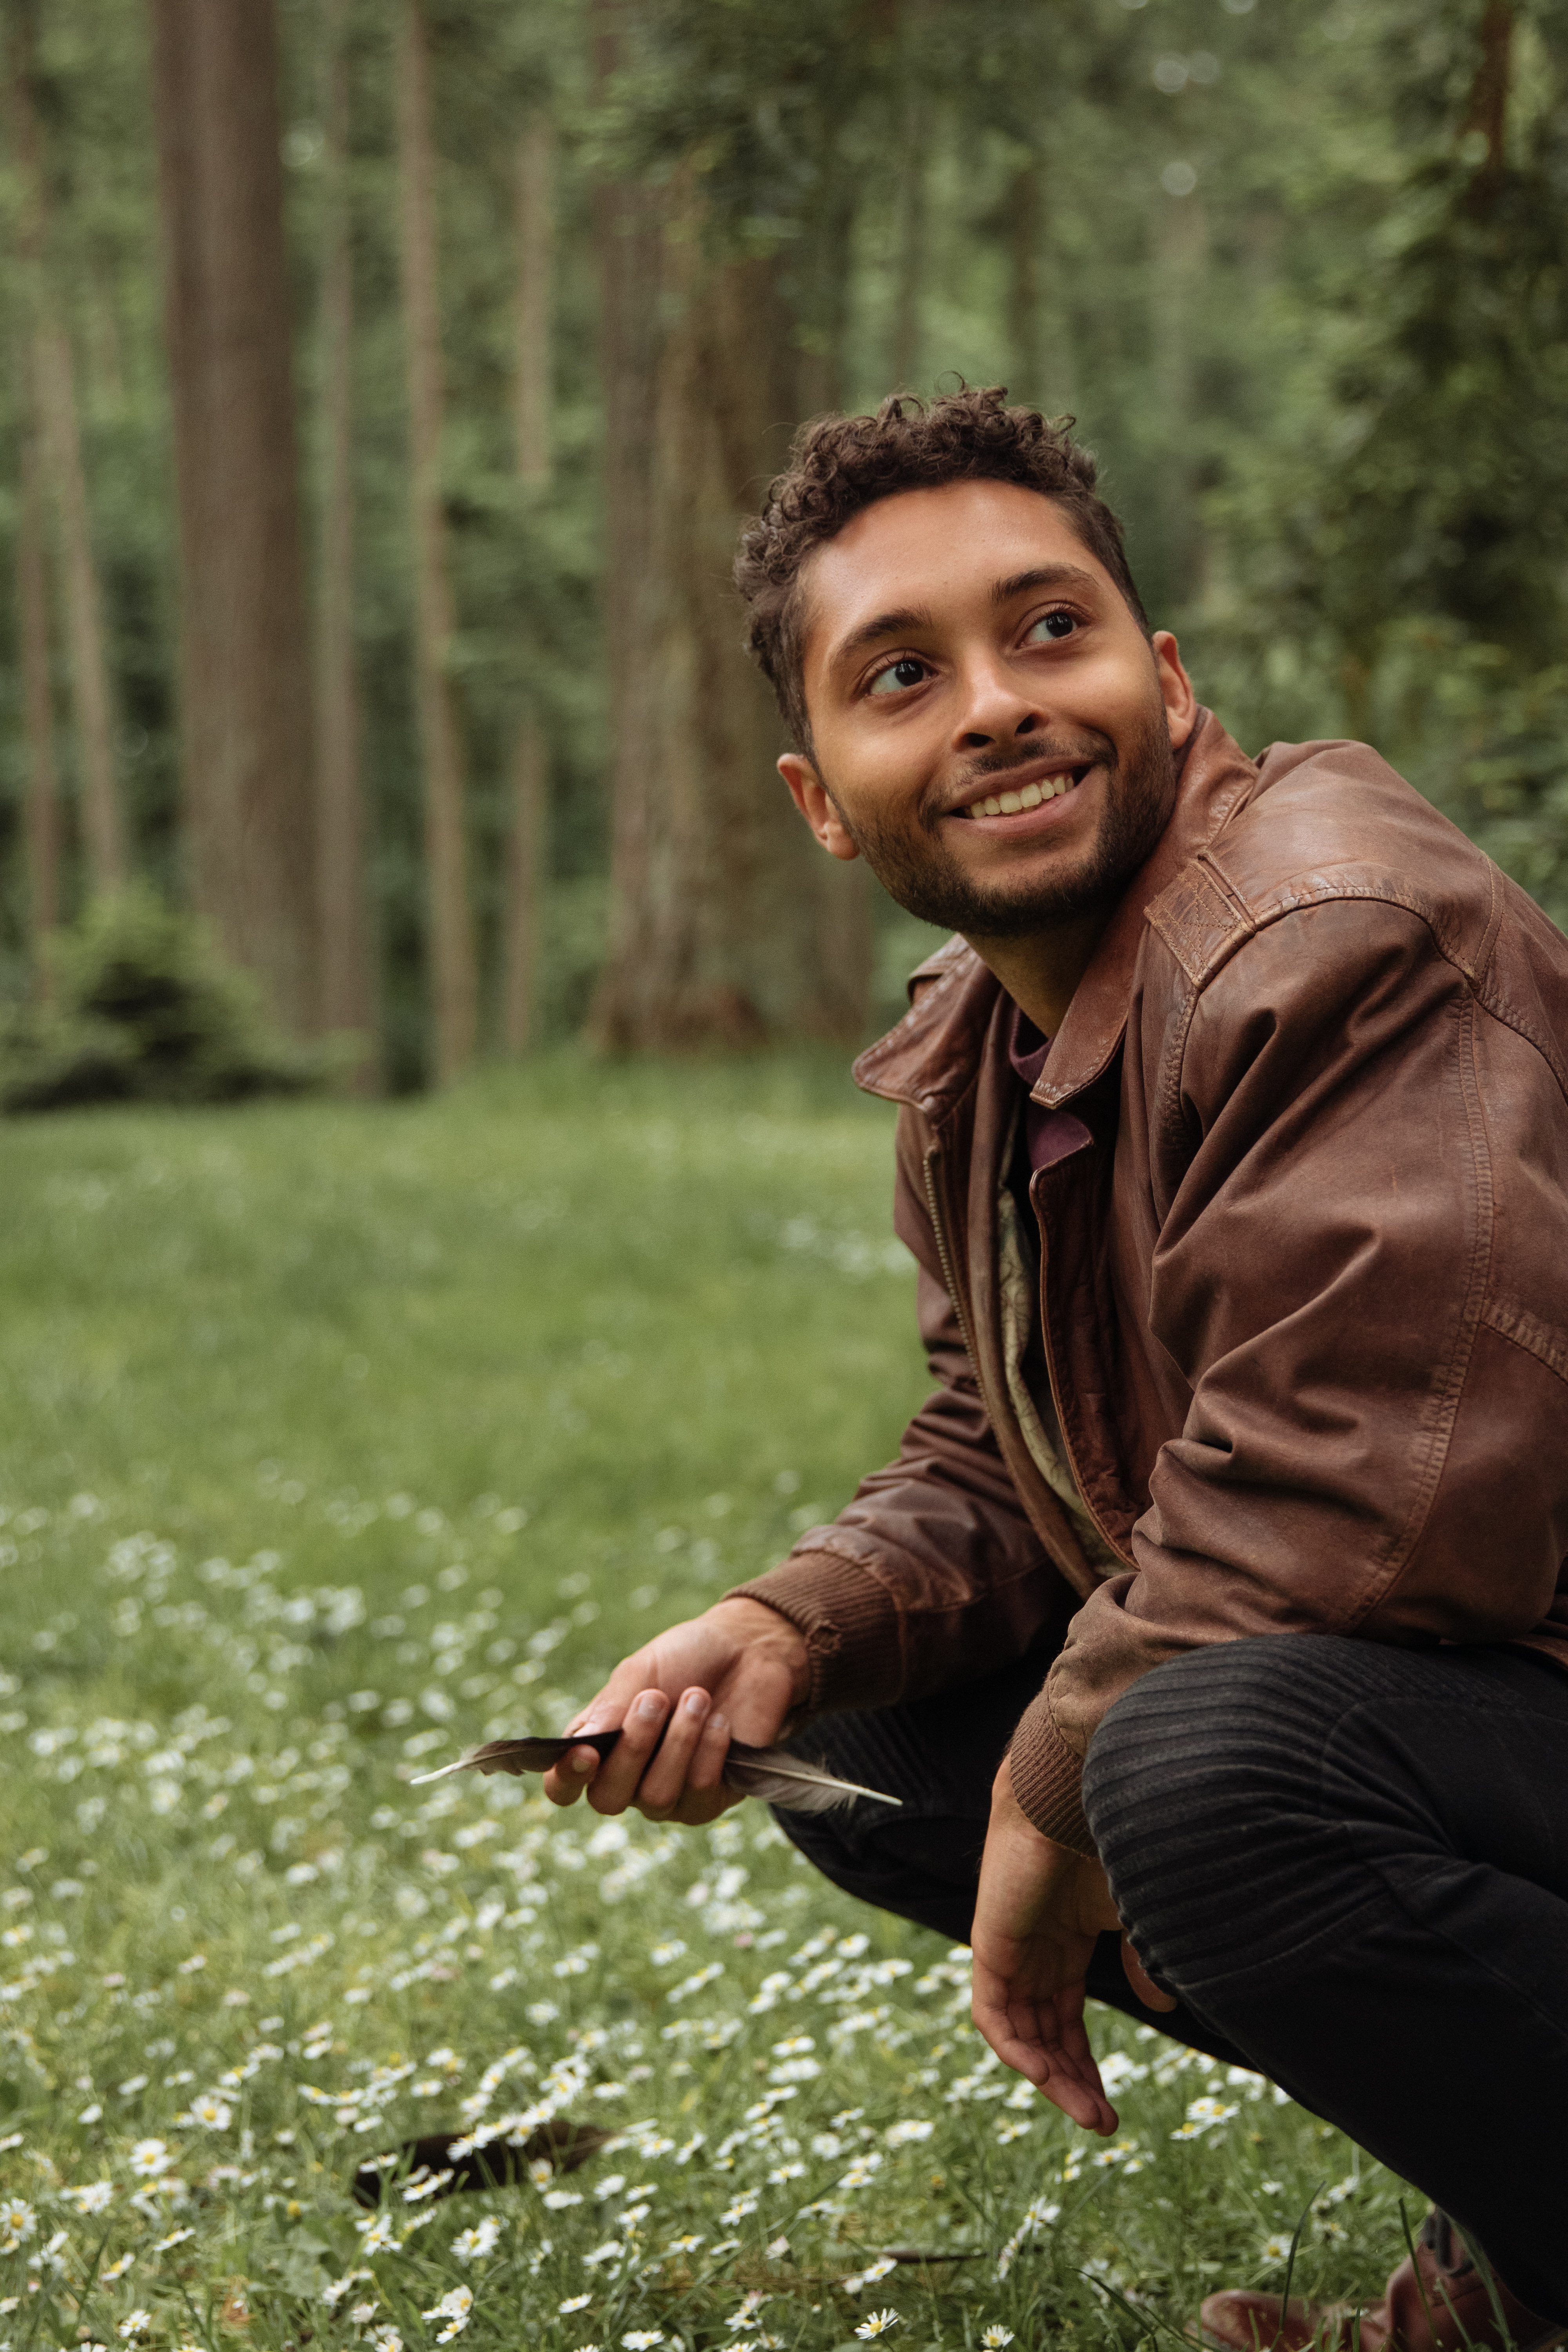 young-man-in-brown-leather-jacket-crouching-in-field-of-wildflowers-with-trees-behind-holding-a-black-feather-and-smiling